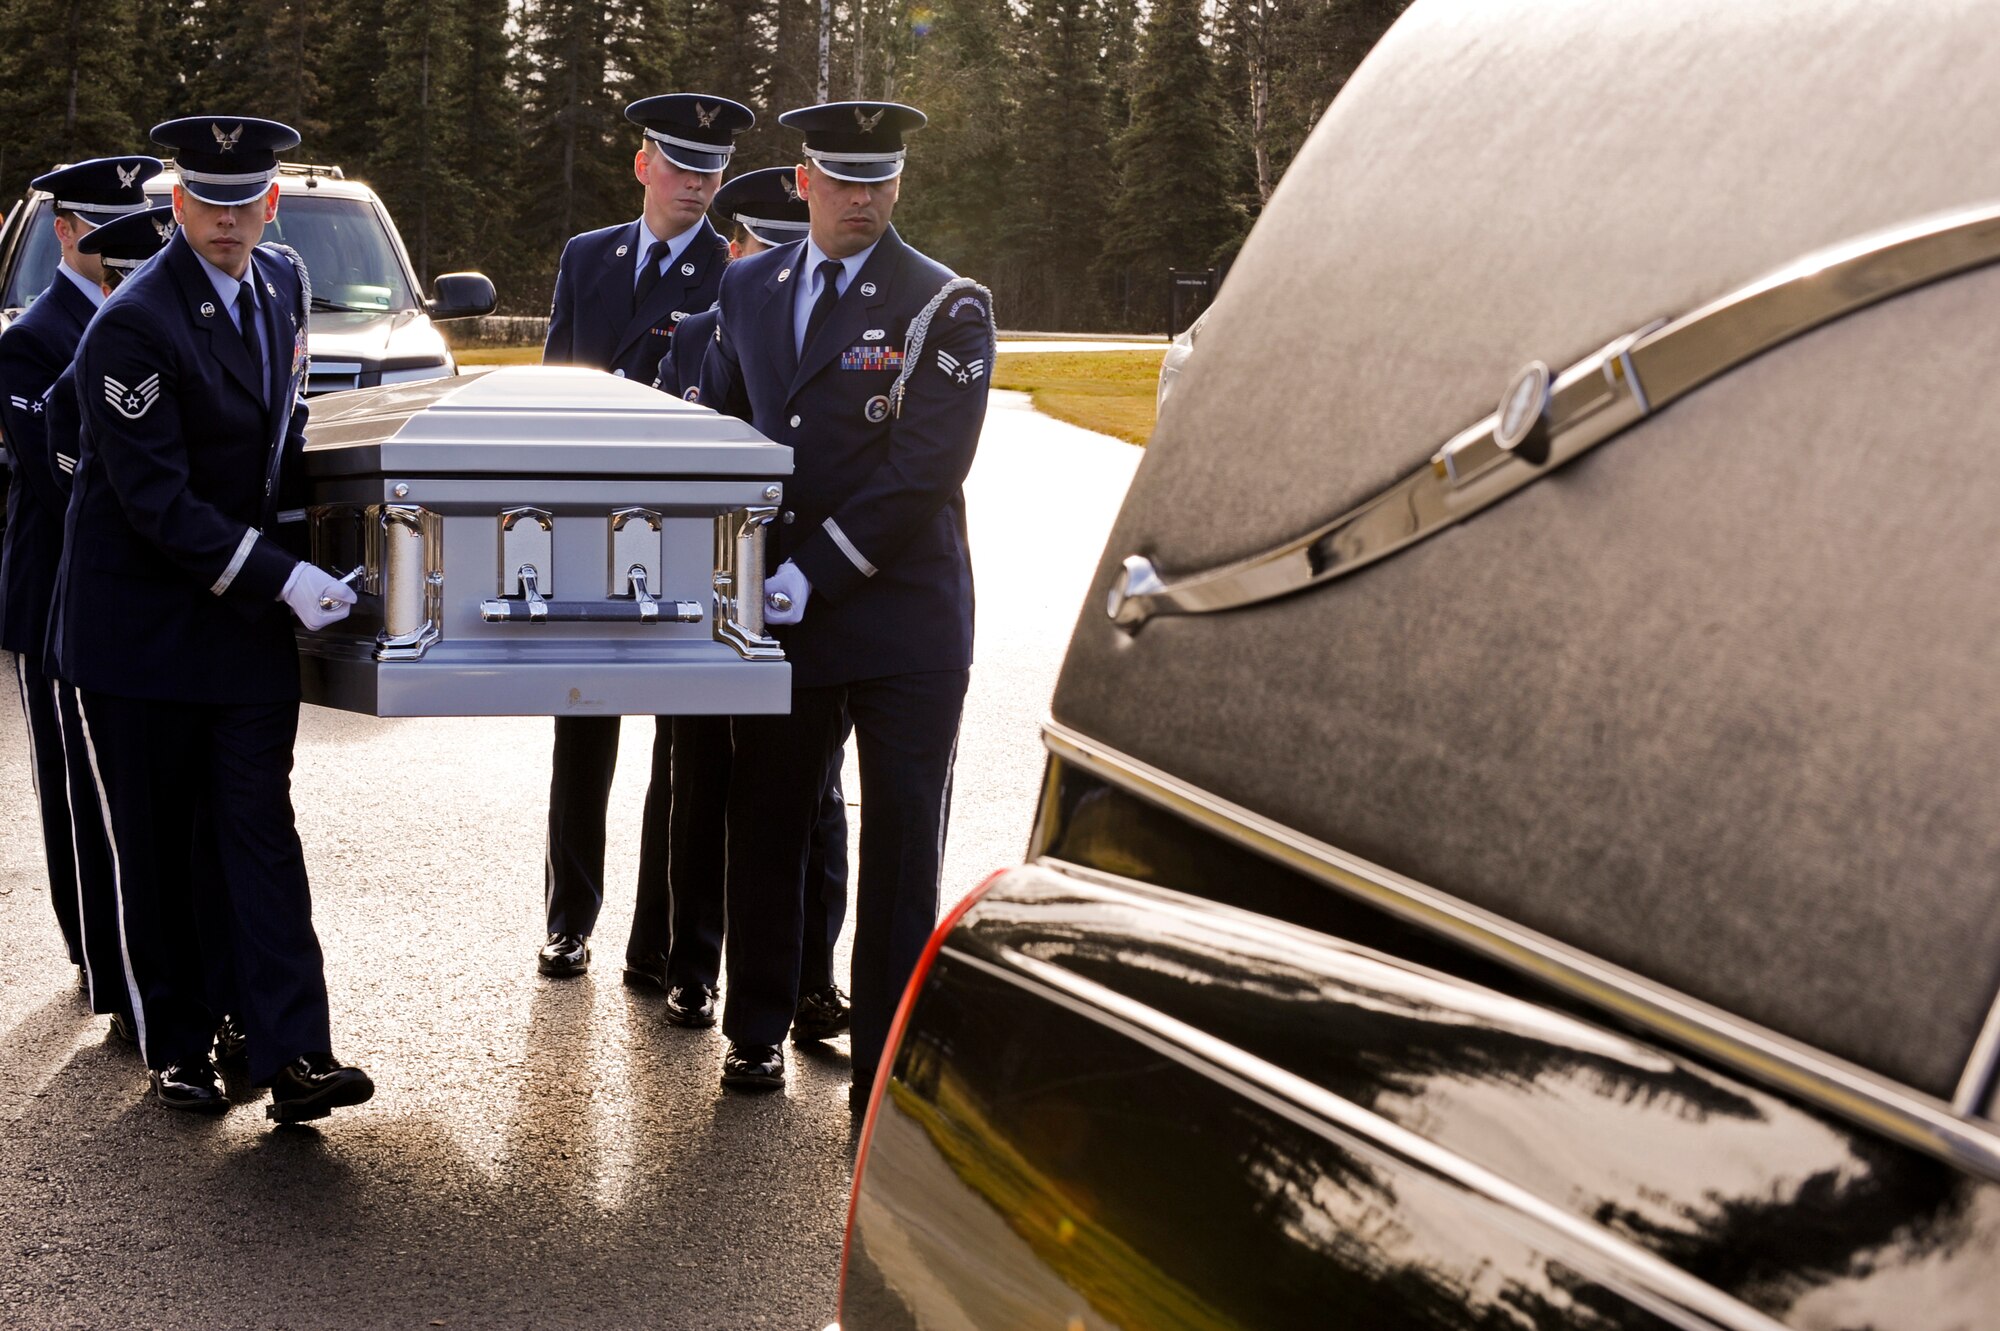 FORT RICHARDSON, Alaska -- Members of the Elmendorf Air Force Base Honor Guard prepare to transfer the coffin of Staff Sgt. Shawn Rankin during the funeral service at the Fort Richardson National Cemetery Oct. 15. Rankin of Anchorage, Alaska, was assigned to the 56th Aircraft Maintenance Squadron and served as an F-16 Fighting Falcon crew chief at Luke Air Force Base, Ariz. (U.S. Air Force photo/Staff Sgt. Joshua Garcia)